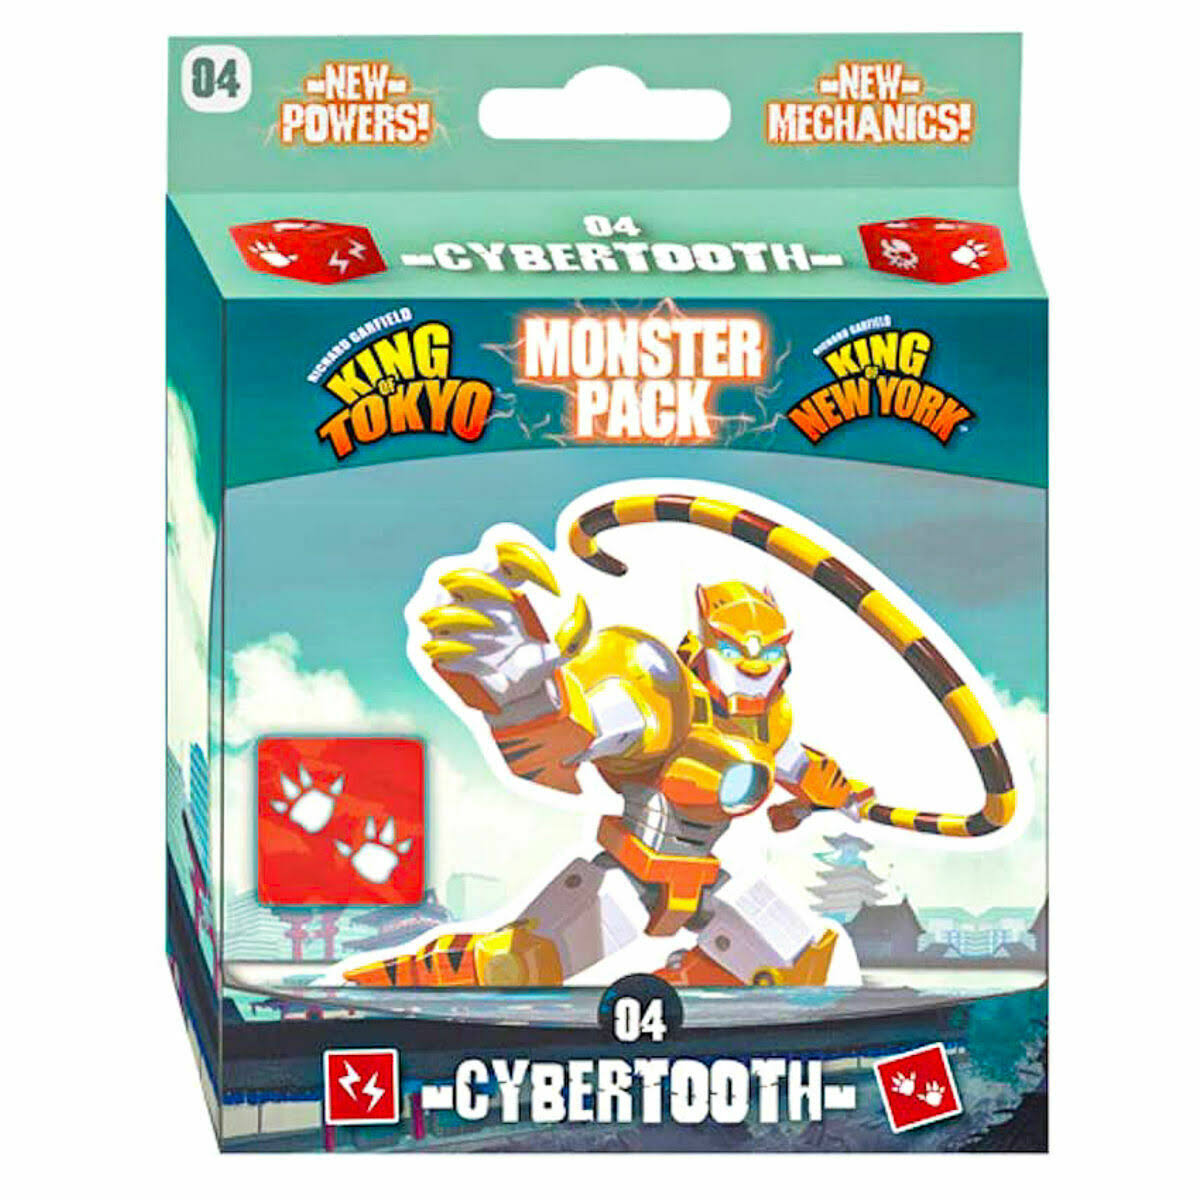 King of Tokyo and New York Cybertooth Monster Pack